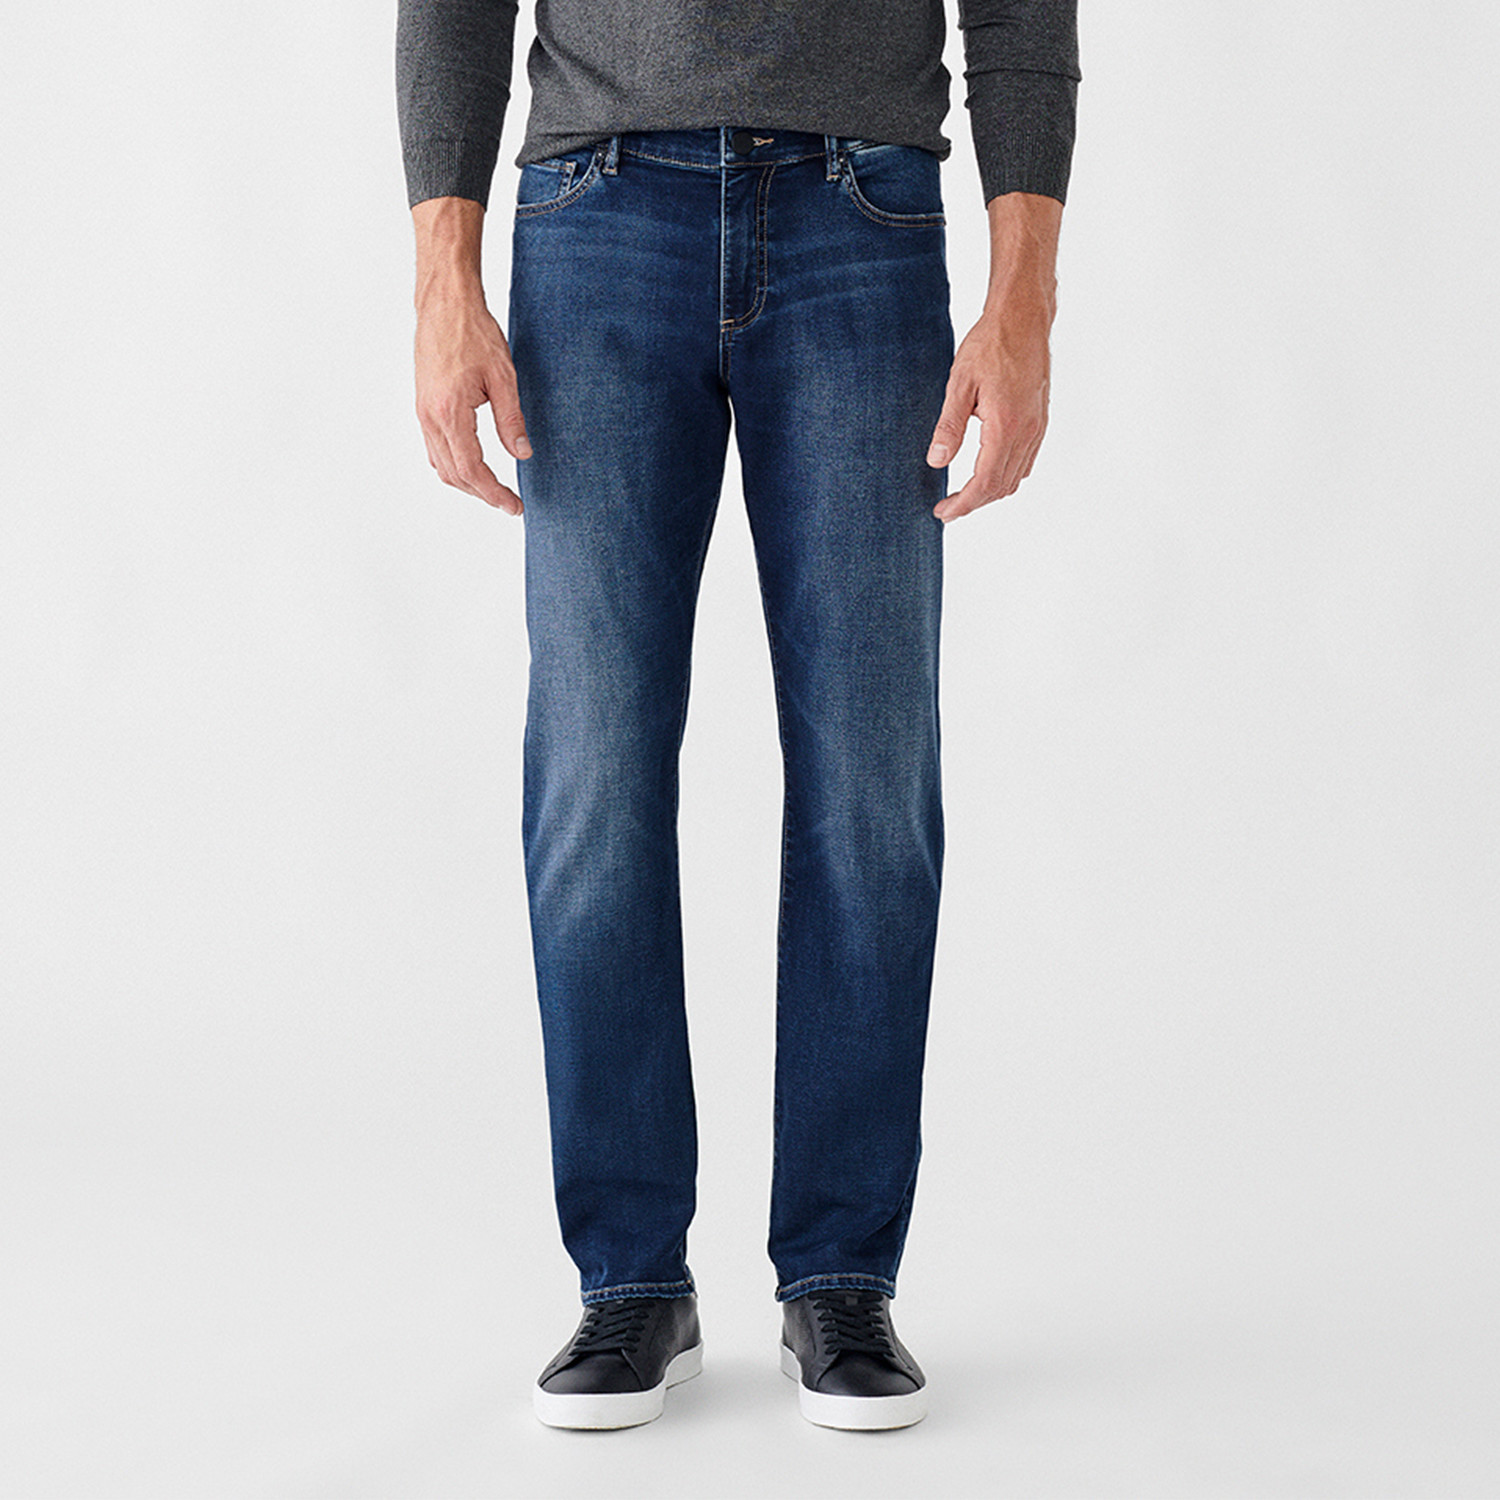 Russell Slim Straight Jeans // Cartel (29WX30L) - DL1961 - Touch of Modern